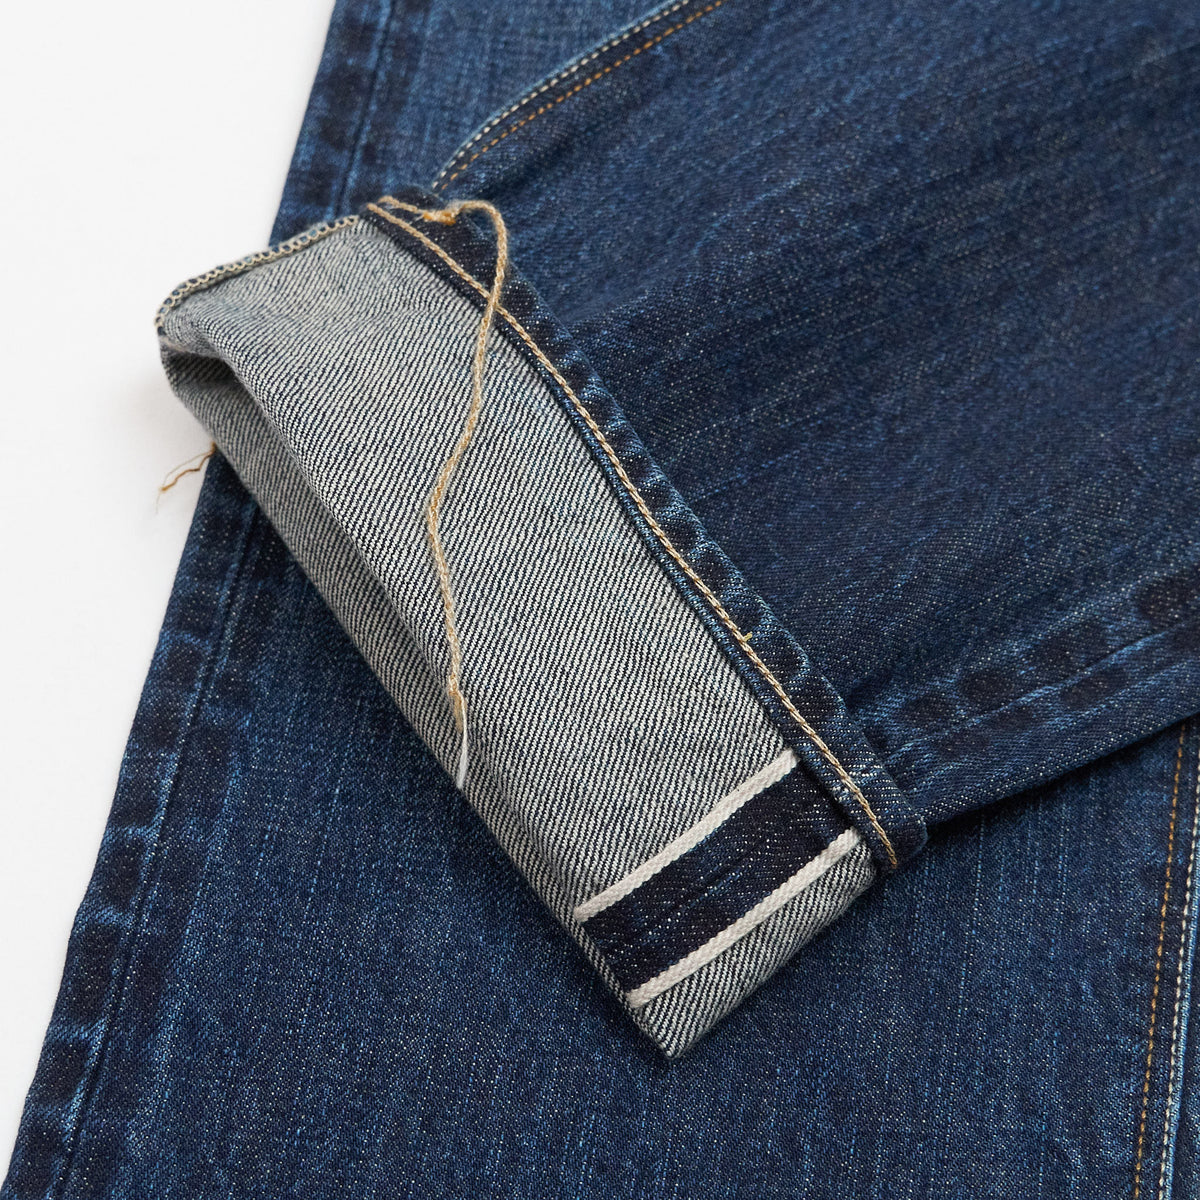 IMjiT x DeeCee style 15oz. Regular Tapered Selvage Denim Jeans Stone Washed